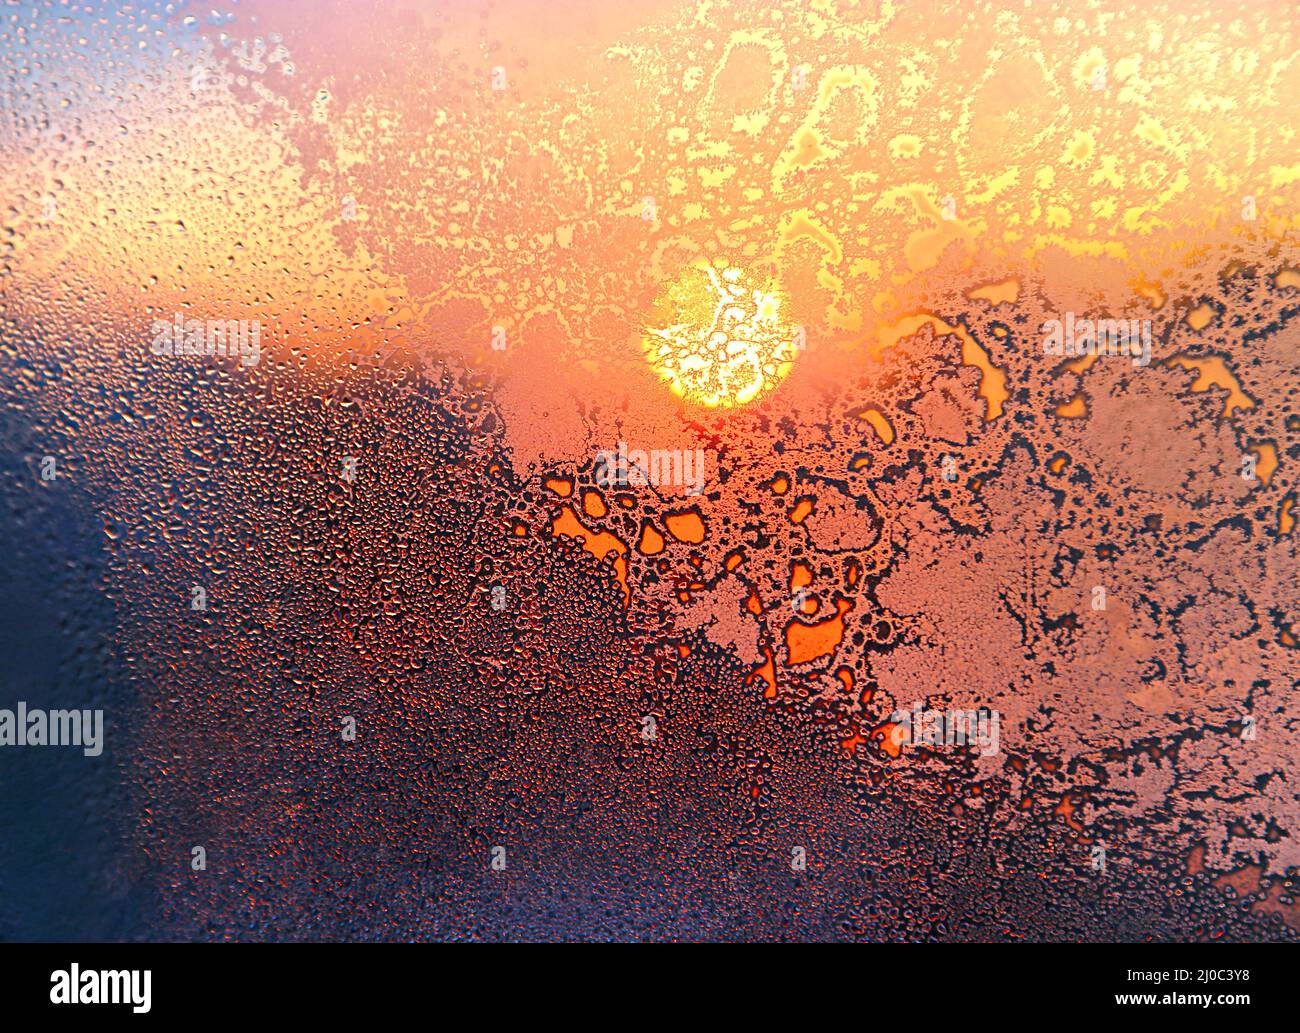 https://c8.alamy.com/comp/2J0C3Y8/nature-background-with-ice-pattern-bright-sunlight-and-water-drops-on-winter-window-glass-2J0C3Y8.jpg